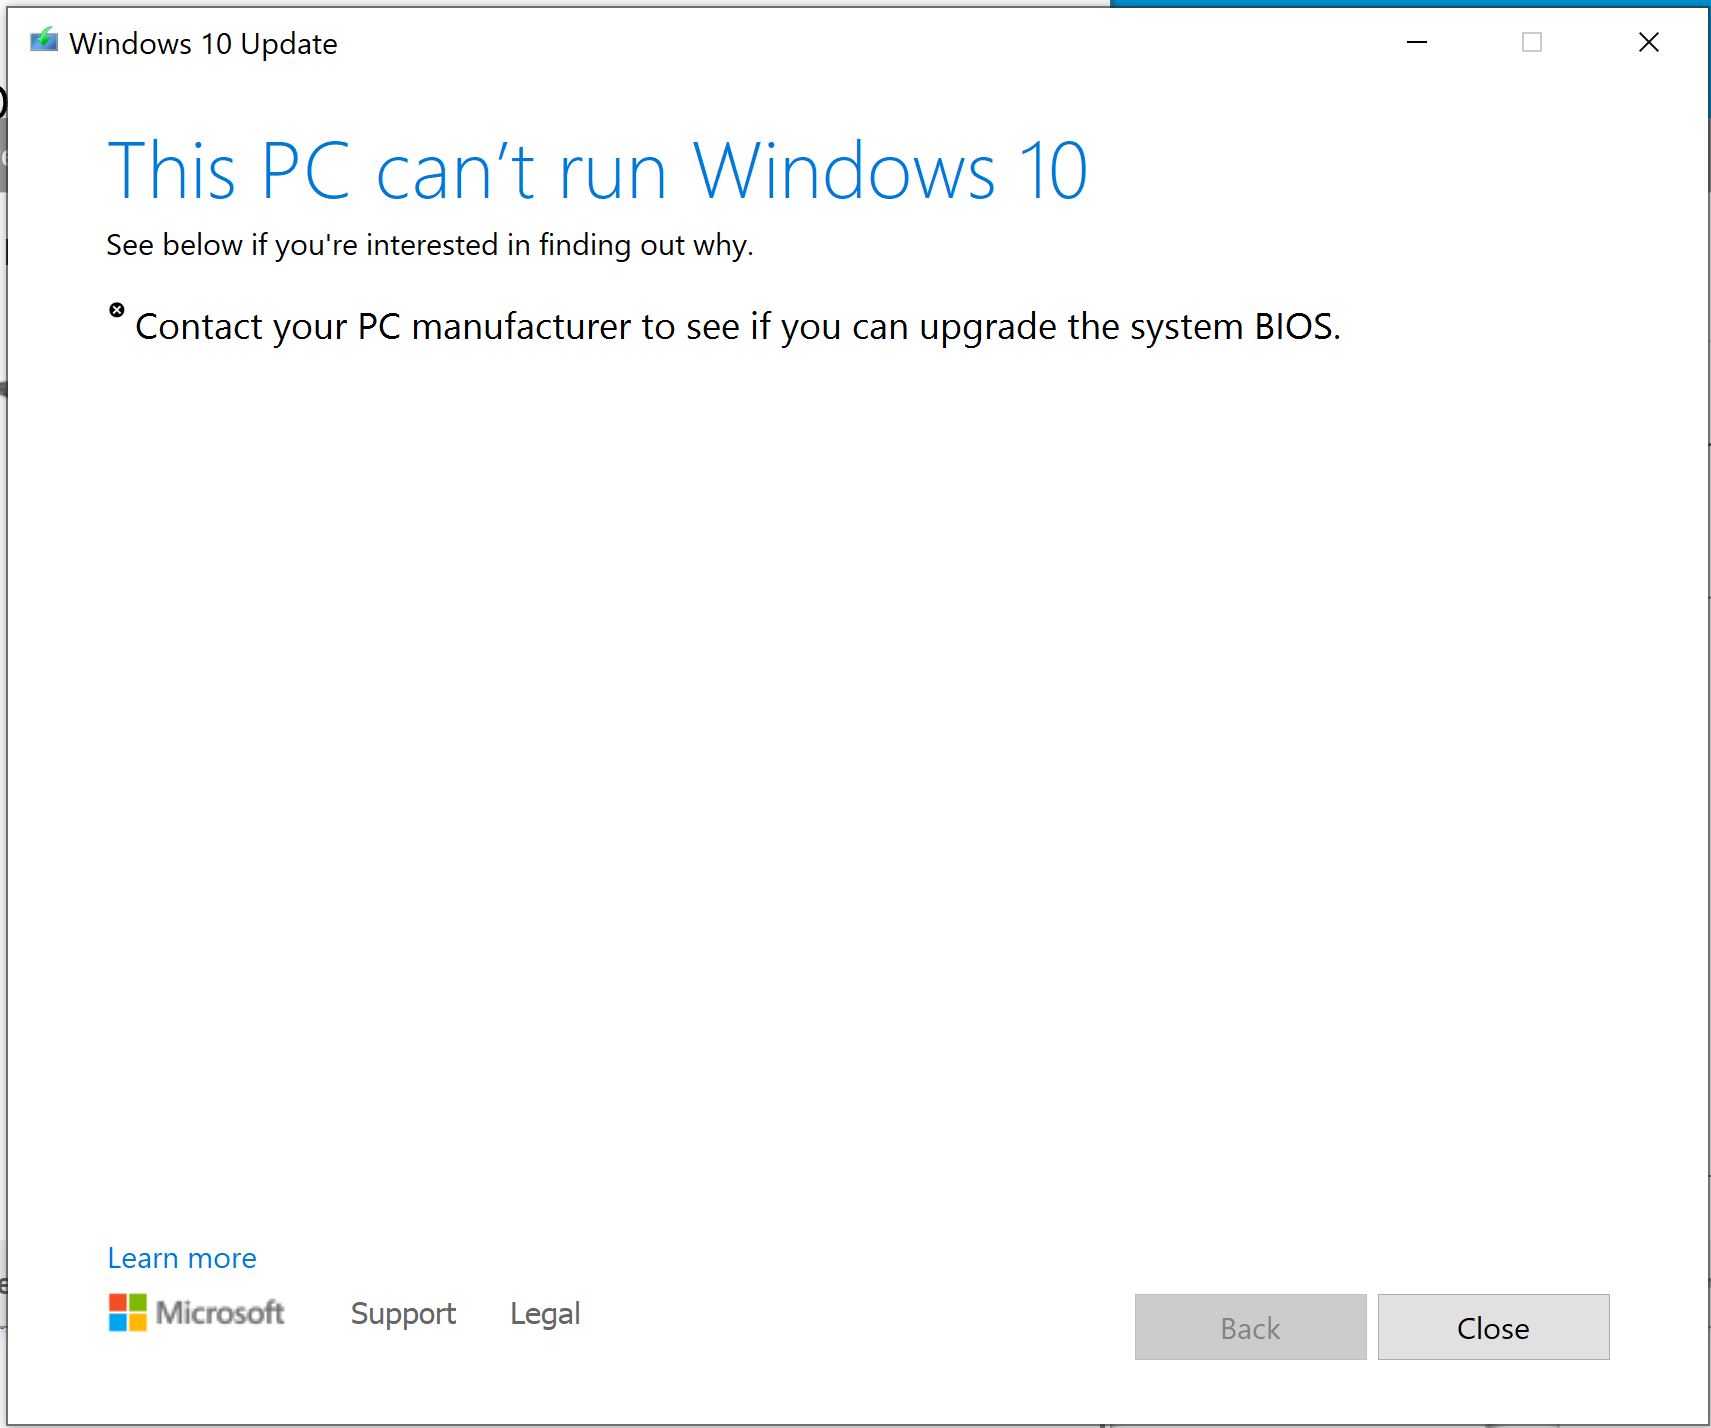 Windows 10 update issue - 'PC Can't run windows 10' - HP Support Community  - 7170843